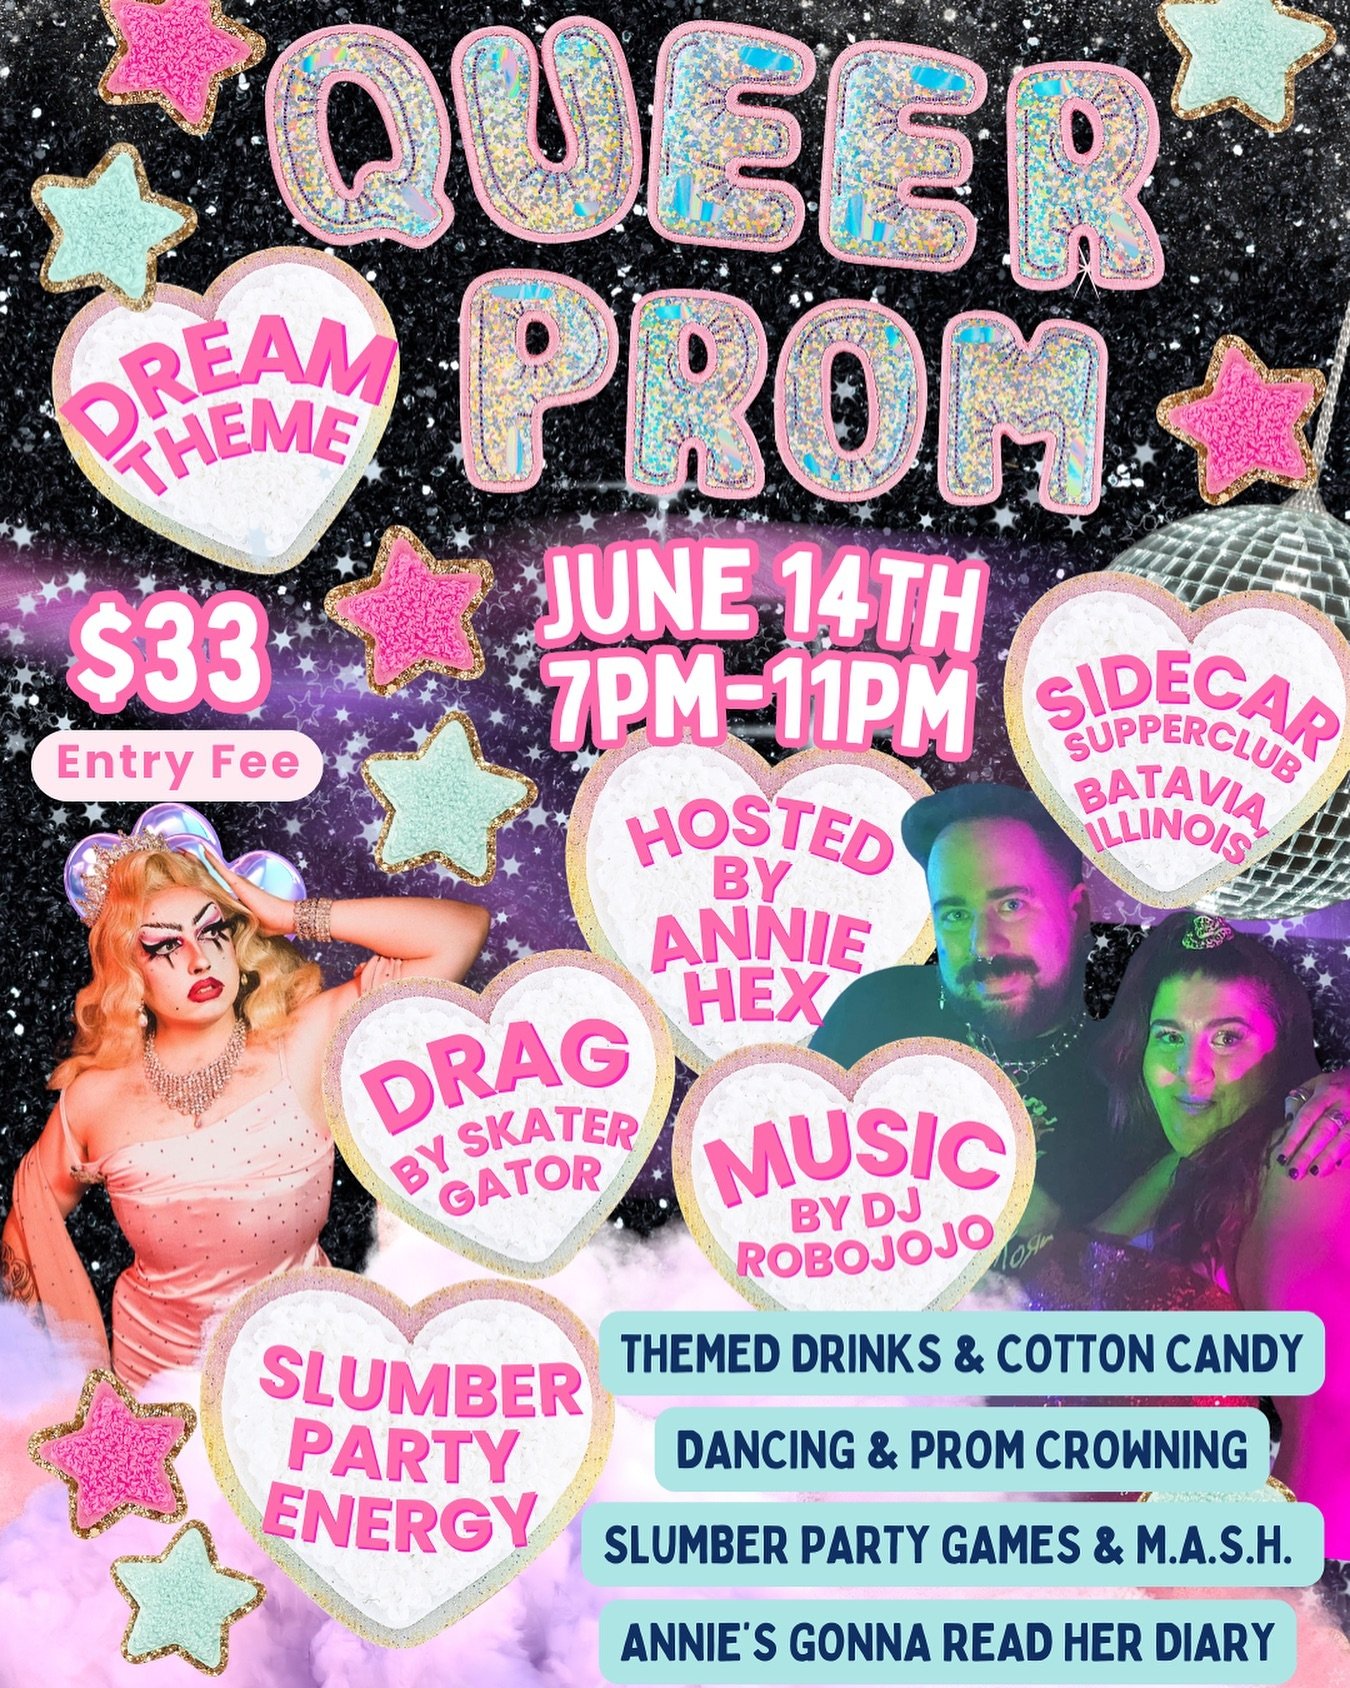 📣 queer prom ticket drop 📣

What: QUEER PROM 🌈🪩
Theme: Dreams / Slumber Party 💭🌛🔮
When: June 14th 7pm - 11pm
Where: Outside in the beer garden at @sidecarsupperclub 🍻💖
Who: For LGBTQIA+ adults 21+

Hosted by @annie.hex 💖🌈🌹
Music by @jerbe